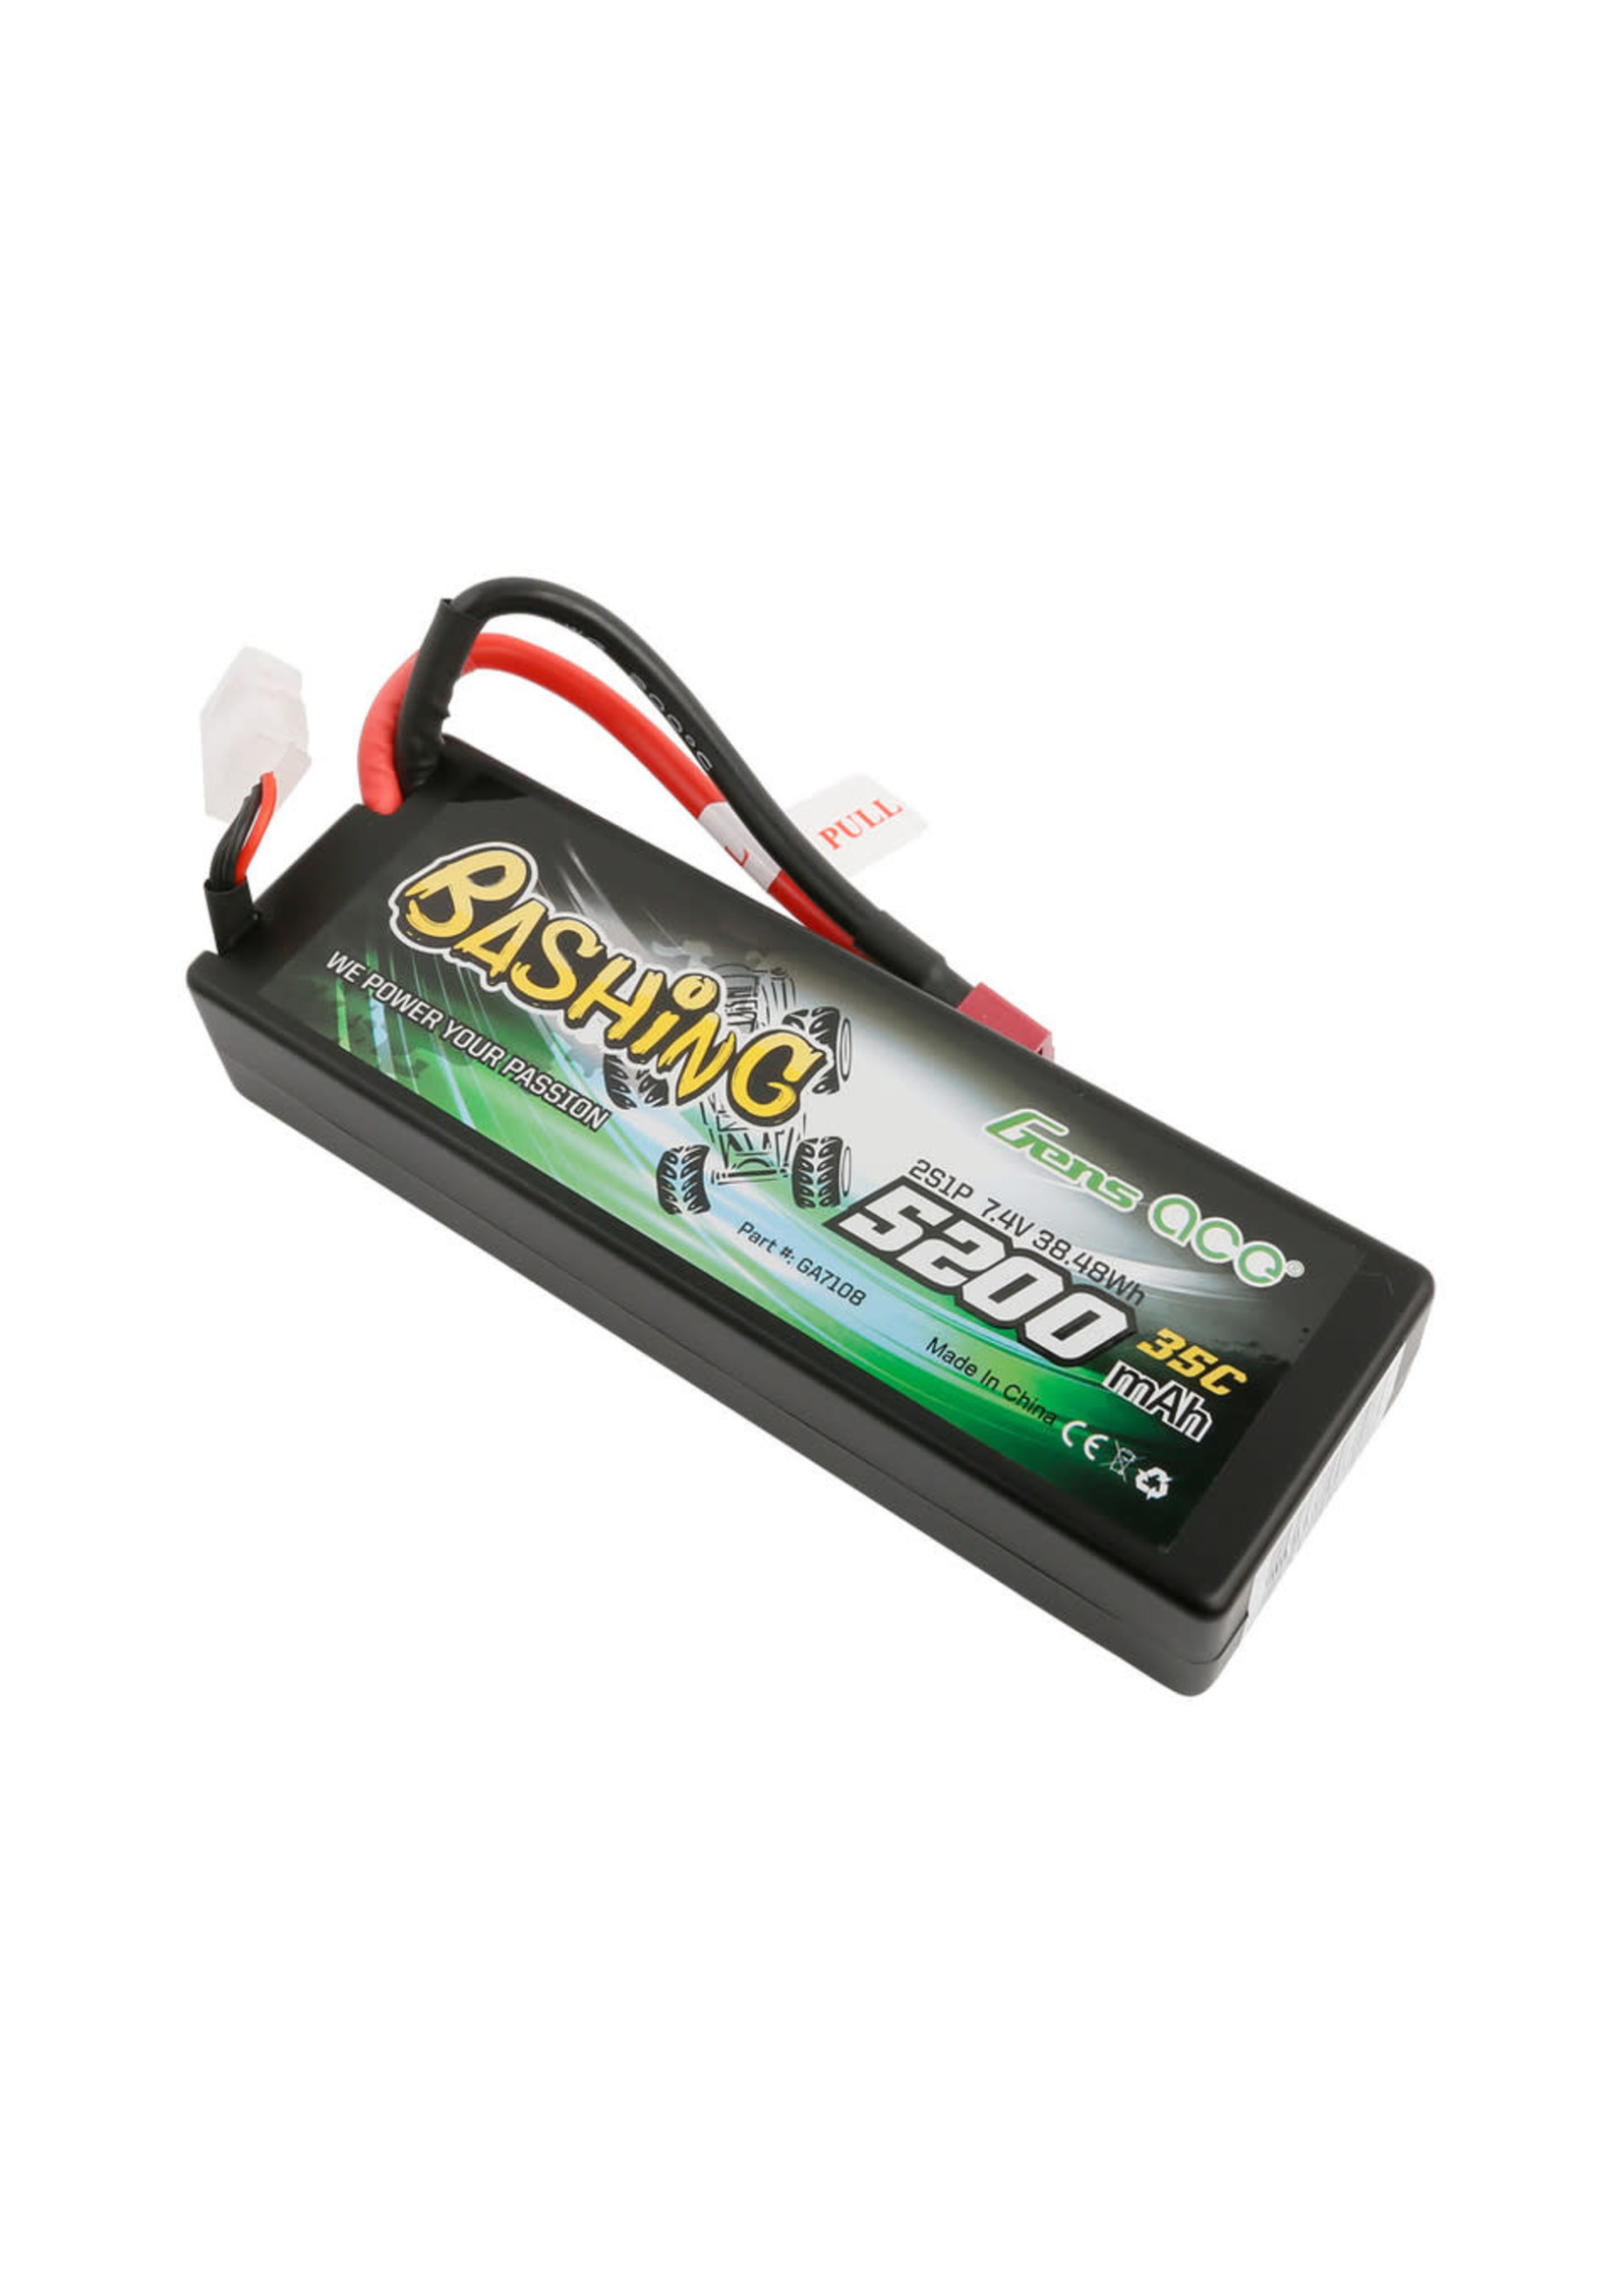 Gens ace GEA52002S35D Gens Ace Bashing Series 5200mAh 7.4V 2S1P 35C Car Lipo Battery Pack Hardcase 24# With Deans Plug